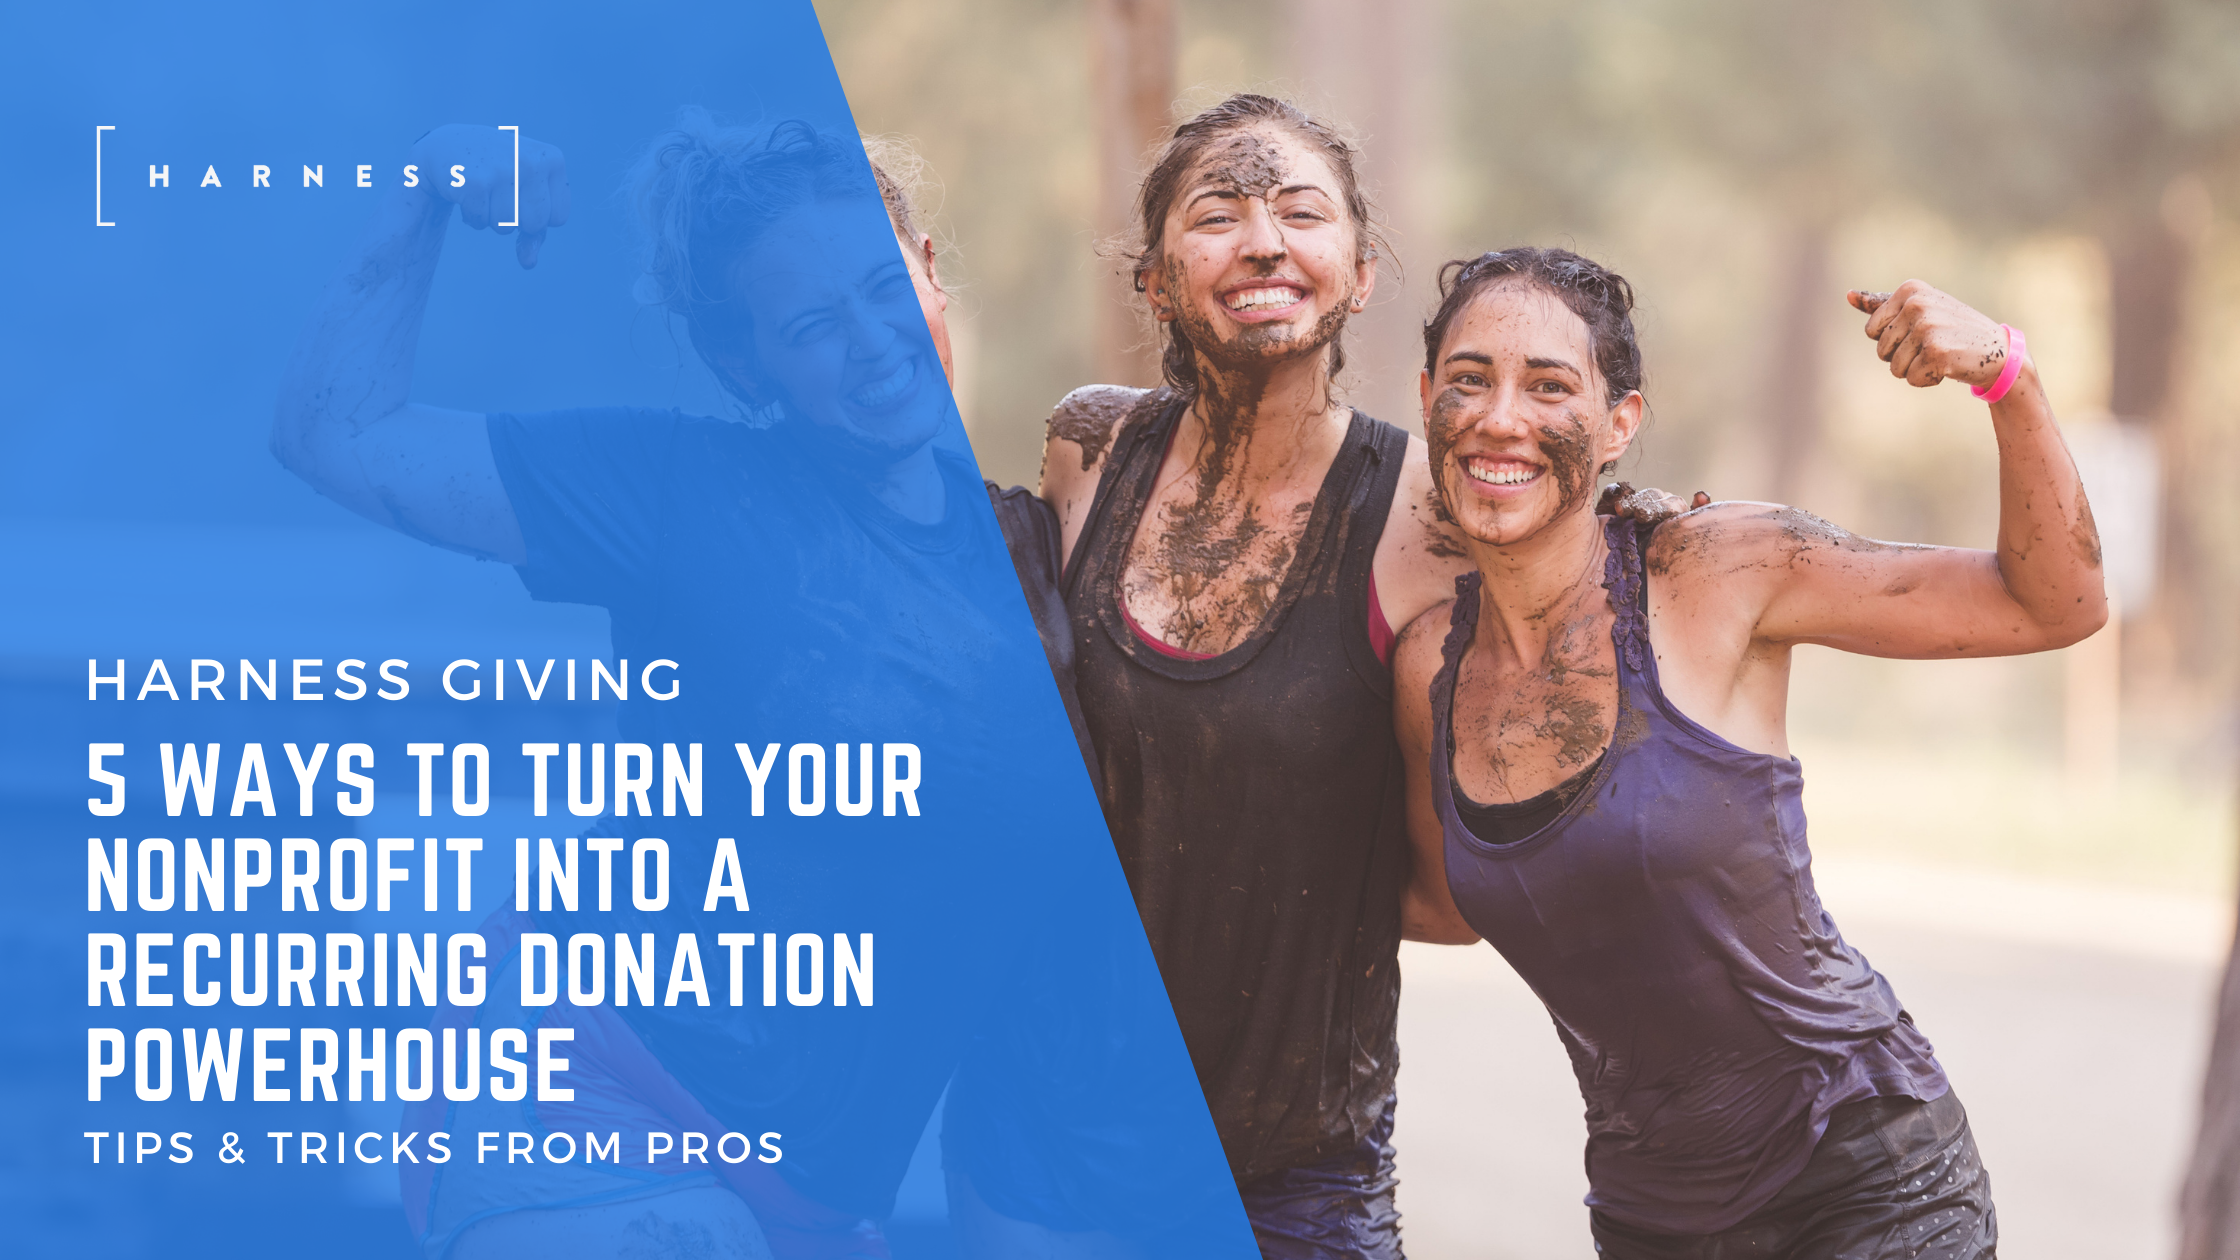 5 Ways to Turn Your Nonprofit into a Recurring Donation Powerhouse